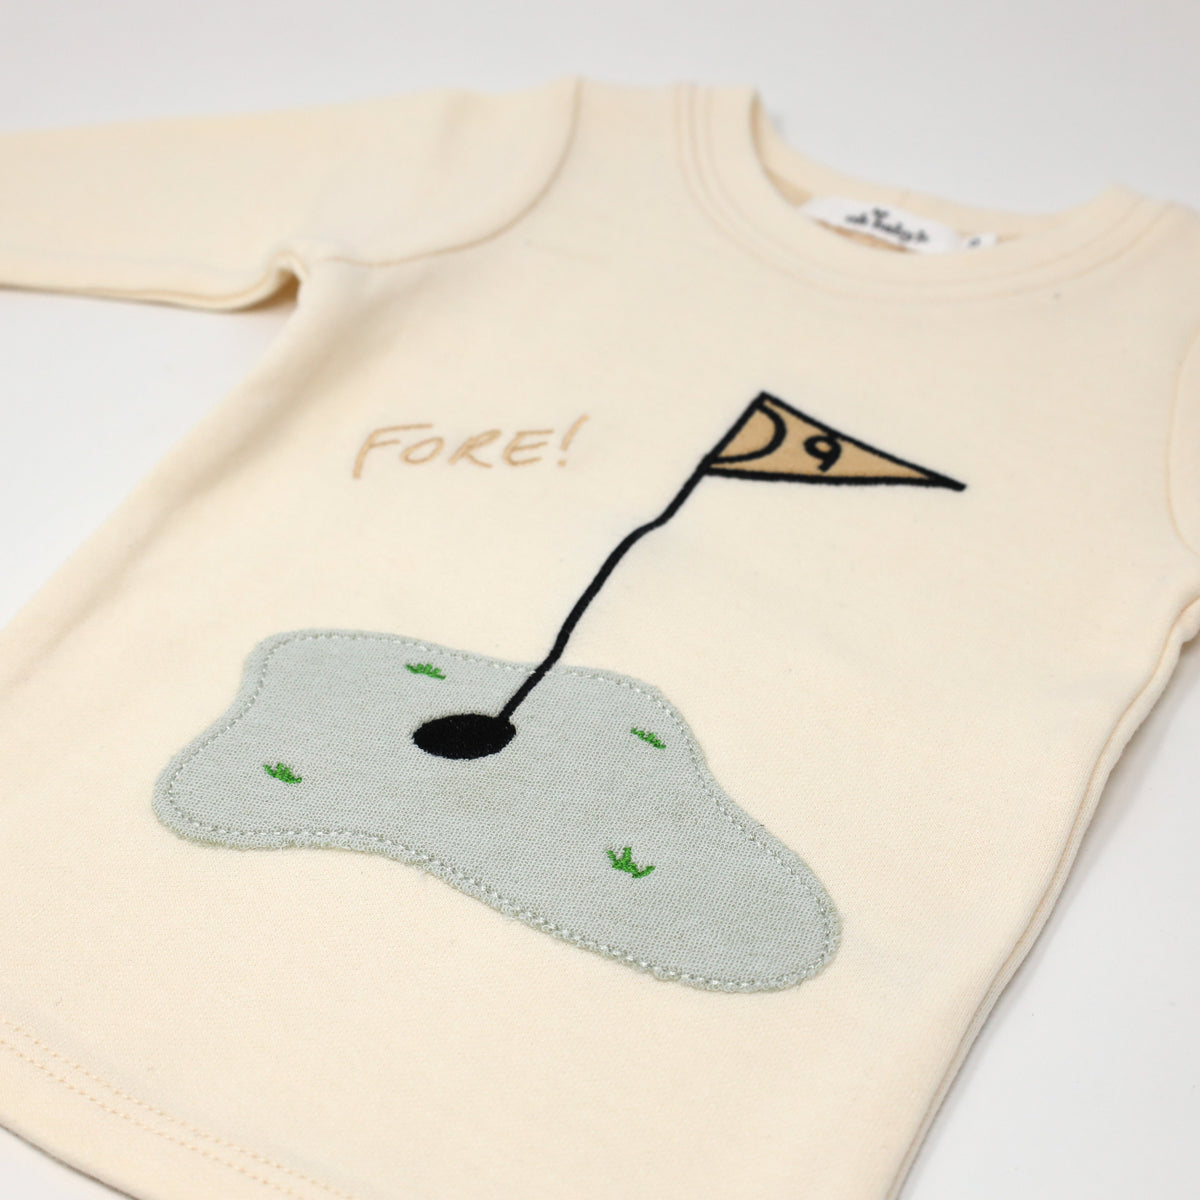 oh baby! Two Piece Set - Golf FORE! Terry Applique - Vanilla